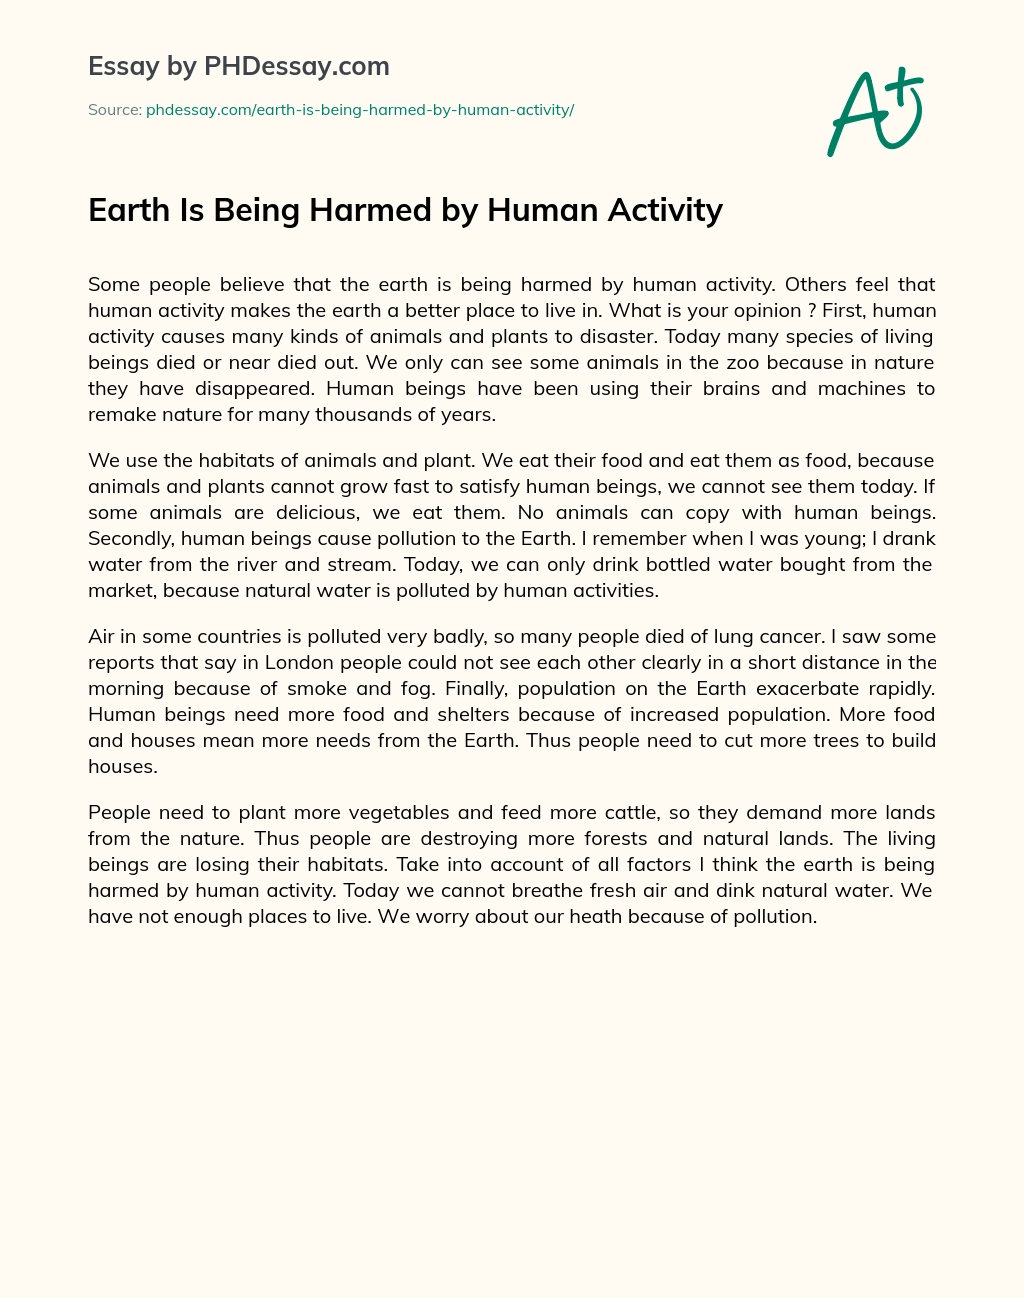 Earth Is Being Harmed by Human Activity essay